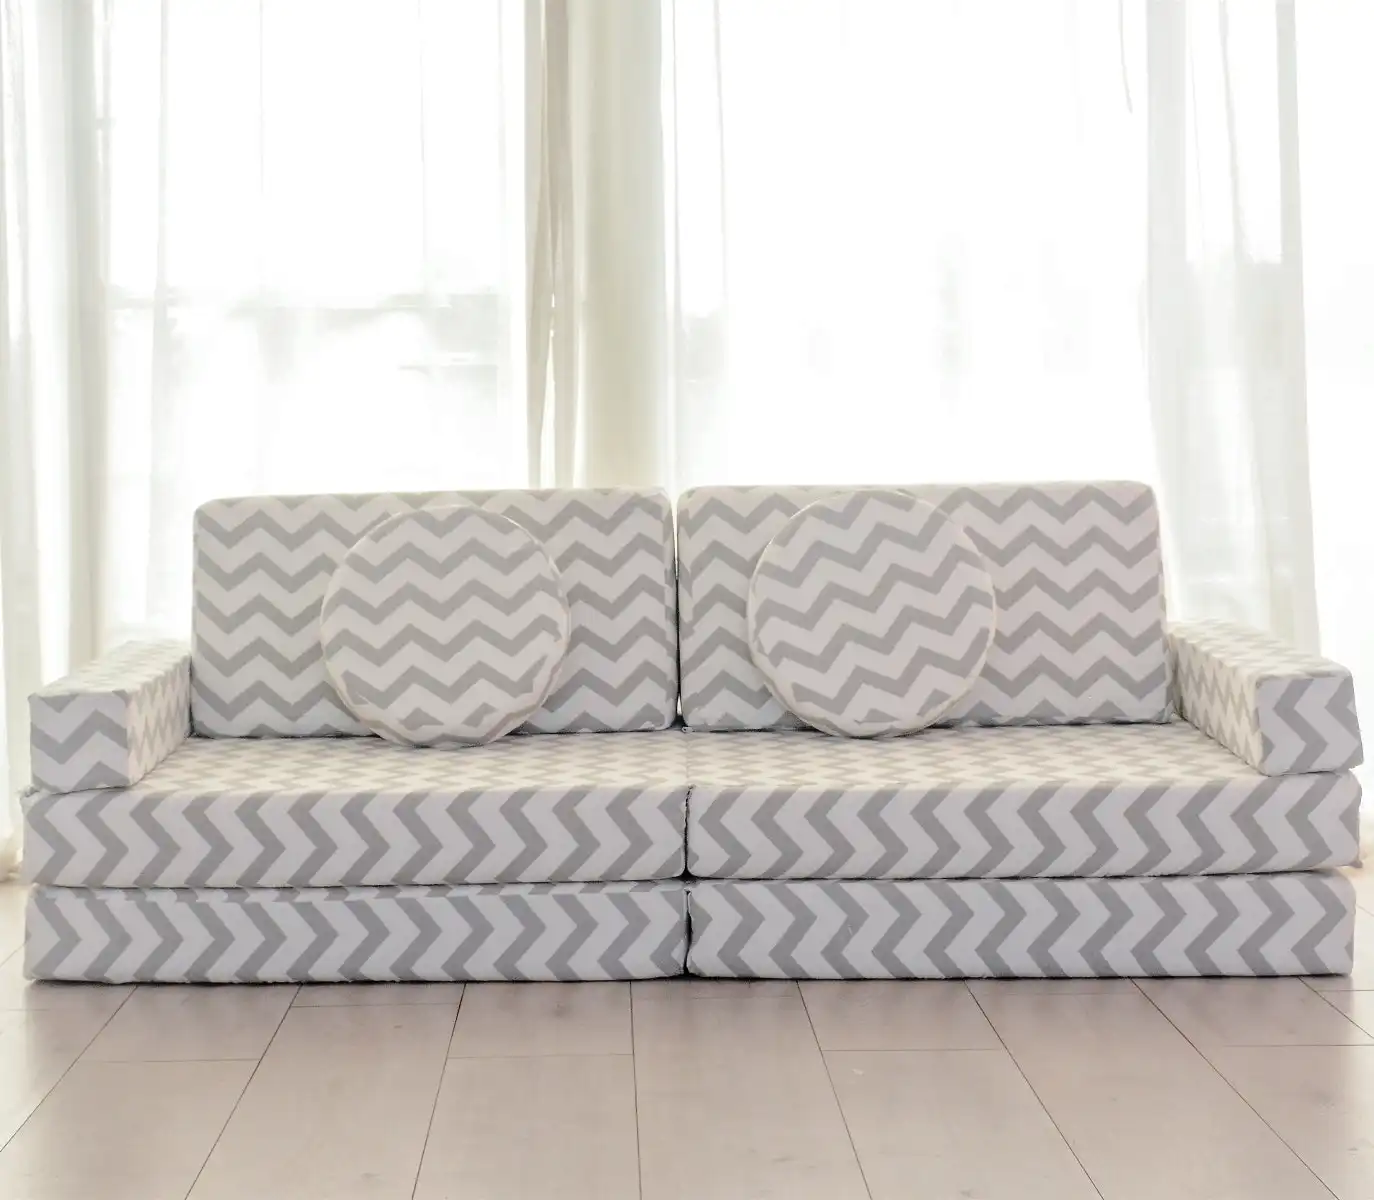 All 4 Kids Roman 10 PCS Play Couch with Farbic Cover - Chevron